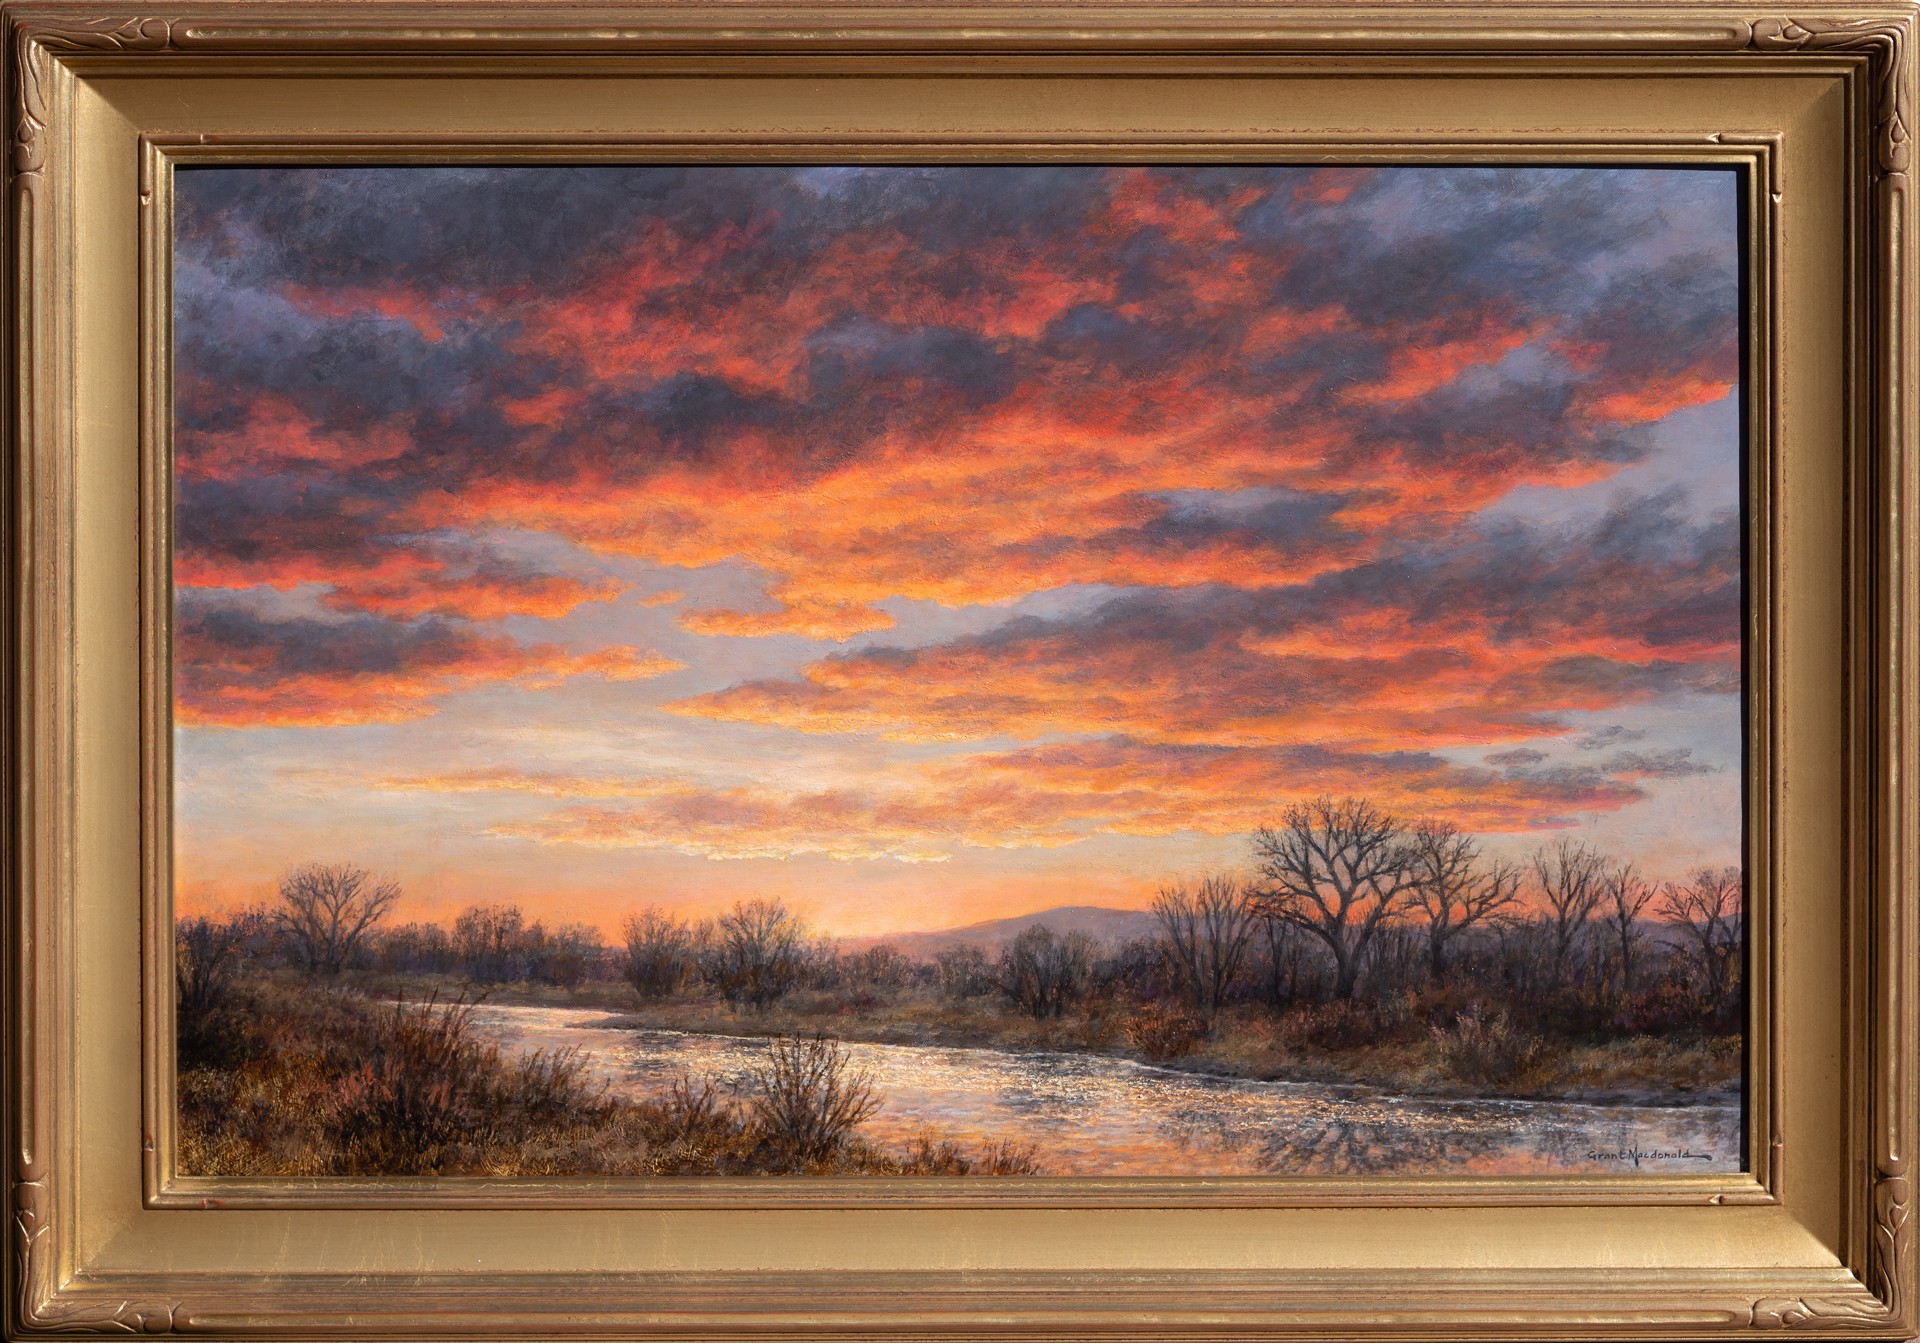 Sunset on the Rio Grande by Grant Macdonald